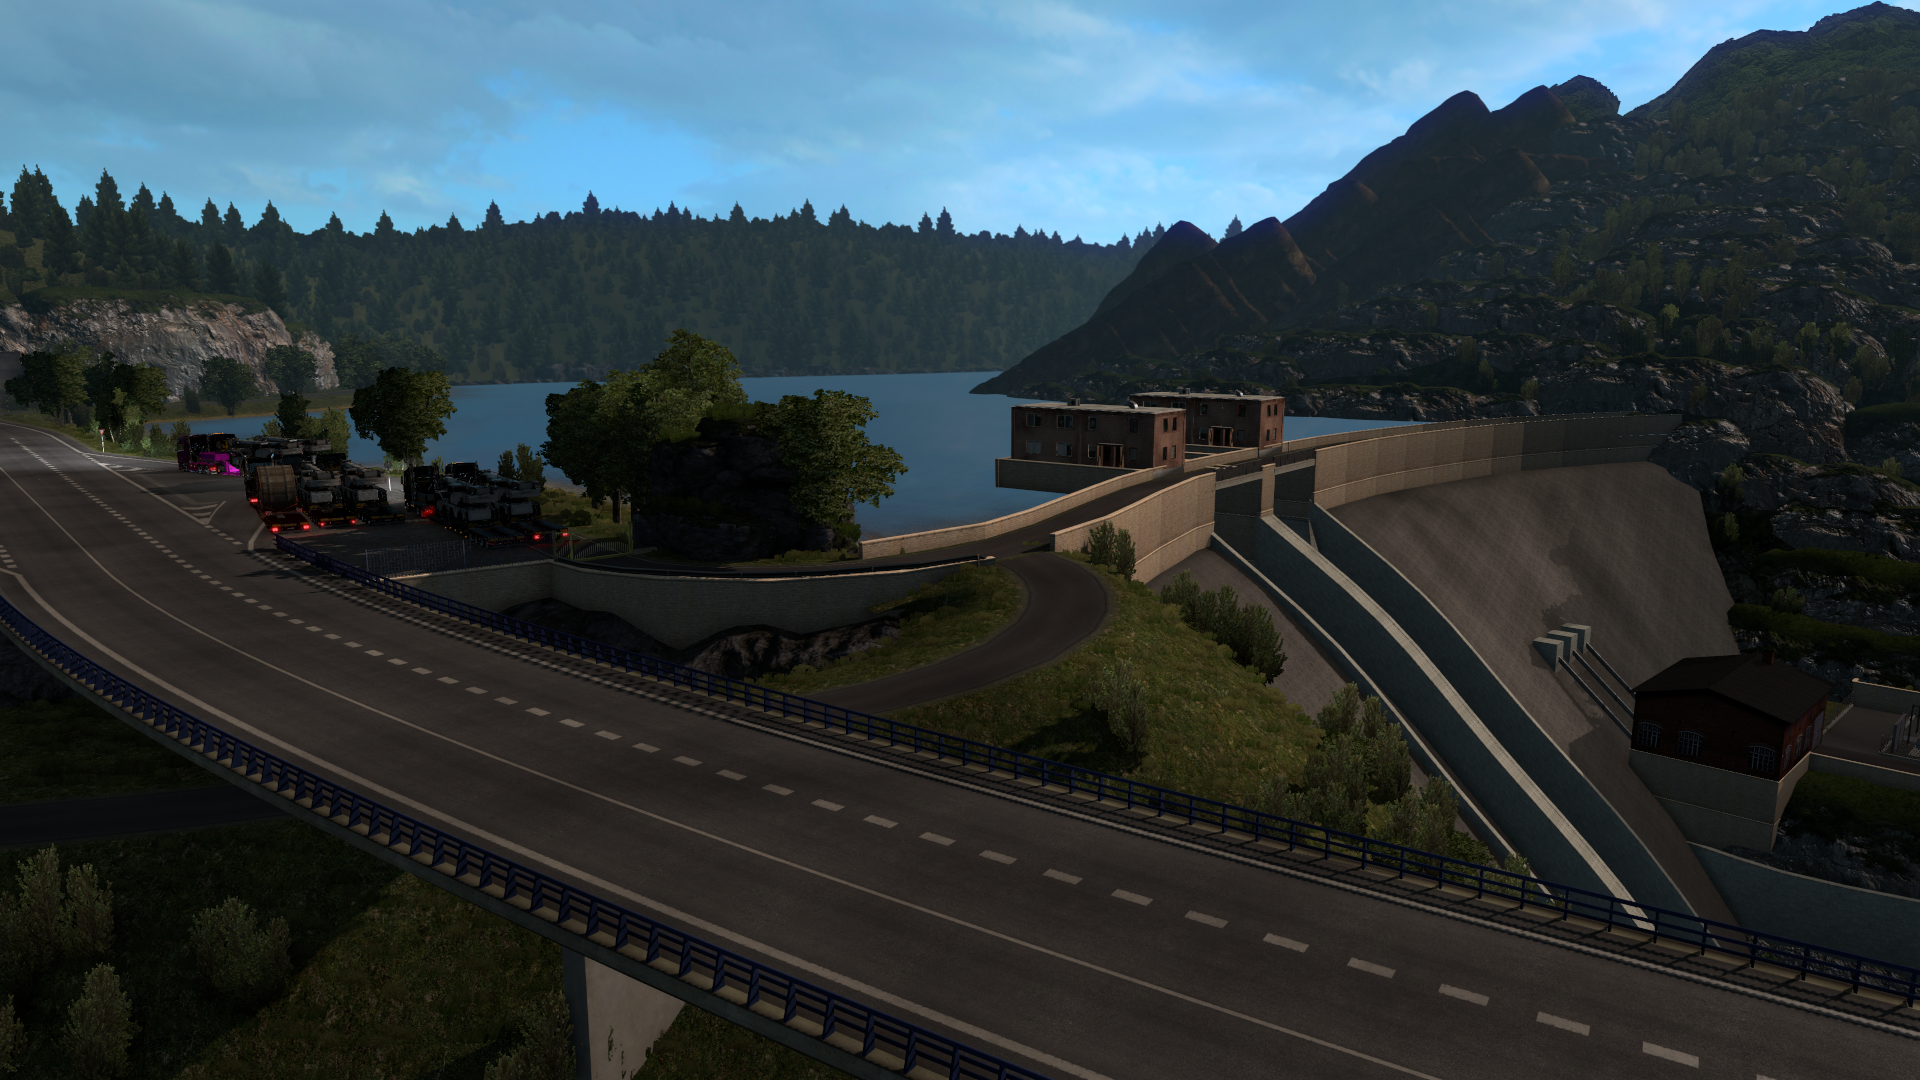 ets2_20210328_000510_00.png